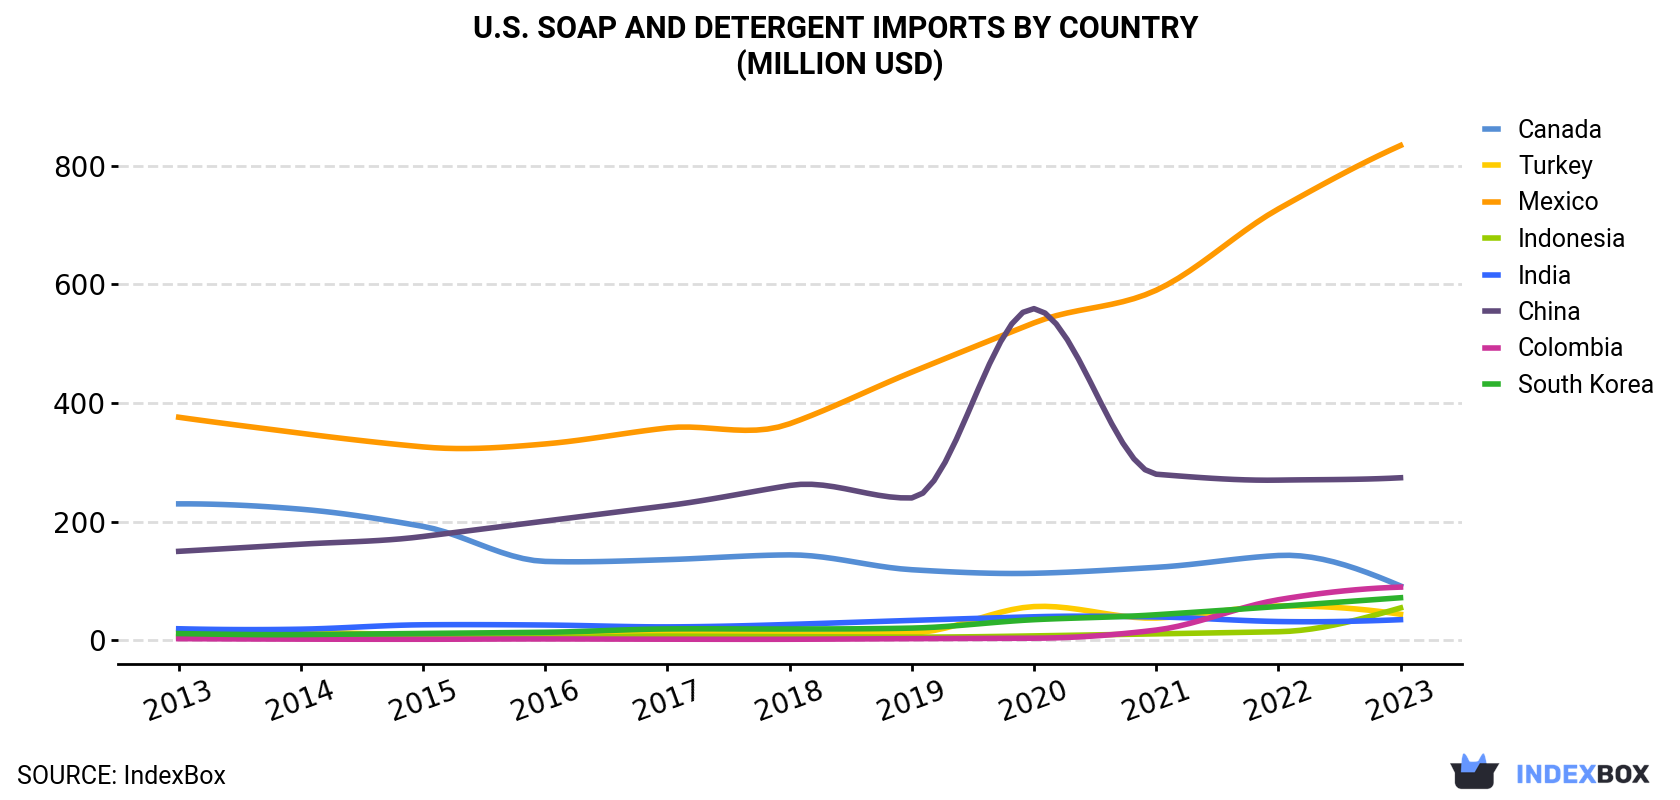 U.S. Soap And Detergent Imports By Country (Million USD)